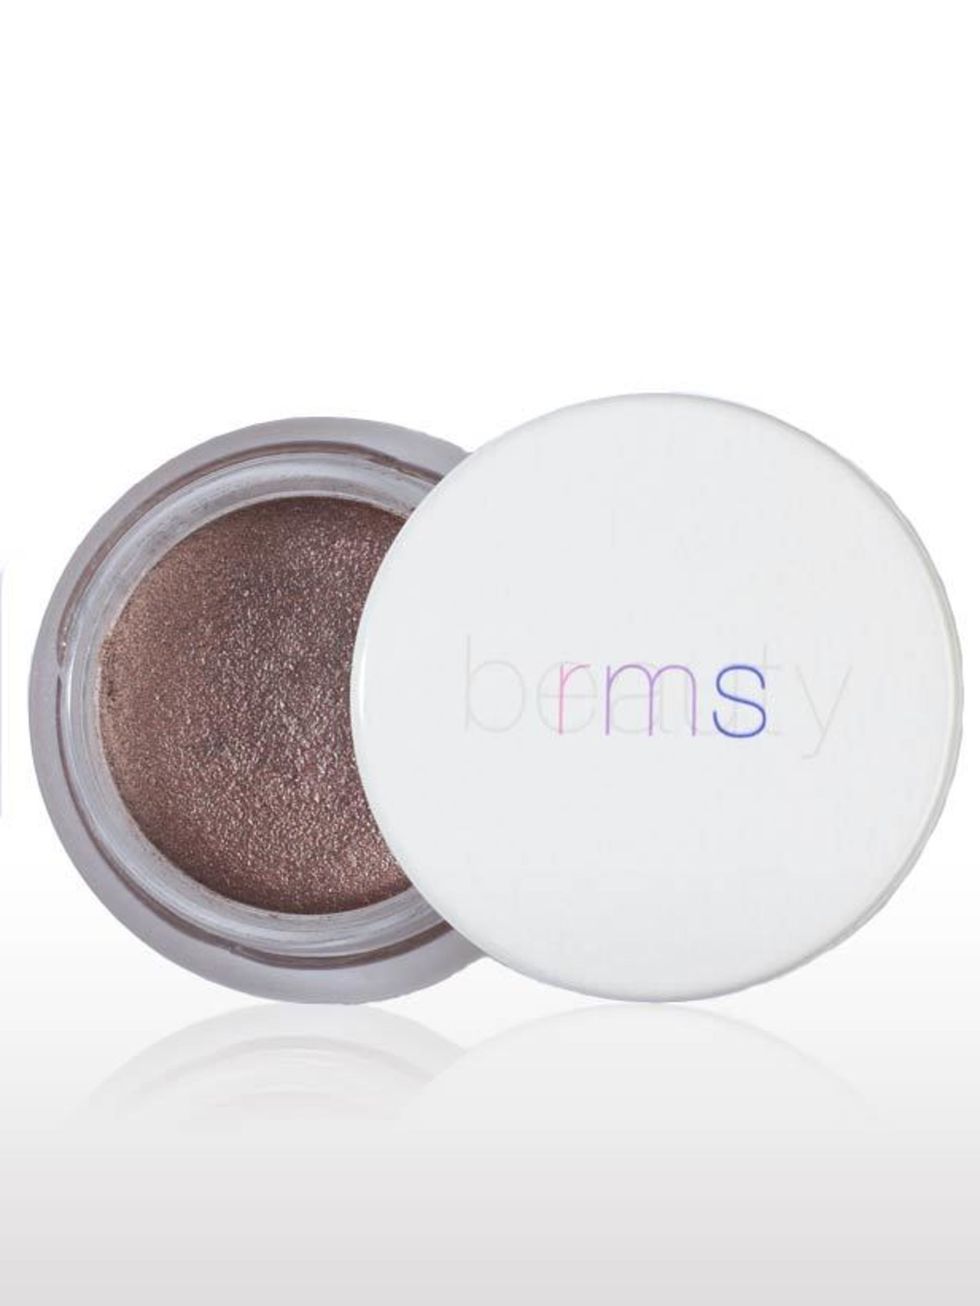 <p>Cream Eye Shadow in Magnetic, £28 by RMS Beauty at <a href="http://www.glowgetter.co.uk/store/category/product/?id=325">Glowgetter</a></p><p>New York make-up artist Rose Marie Swift masterminded RMS as a skincare with colour brand. All the ingredient